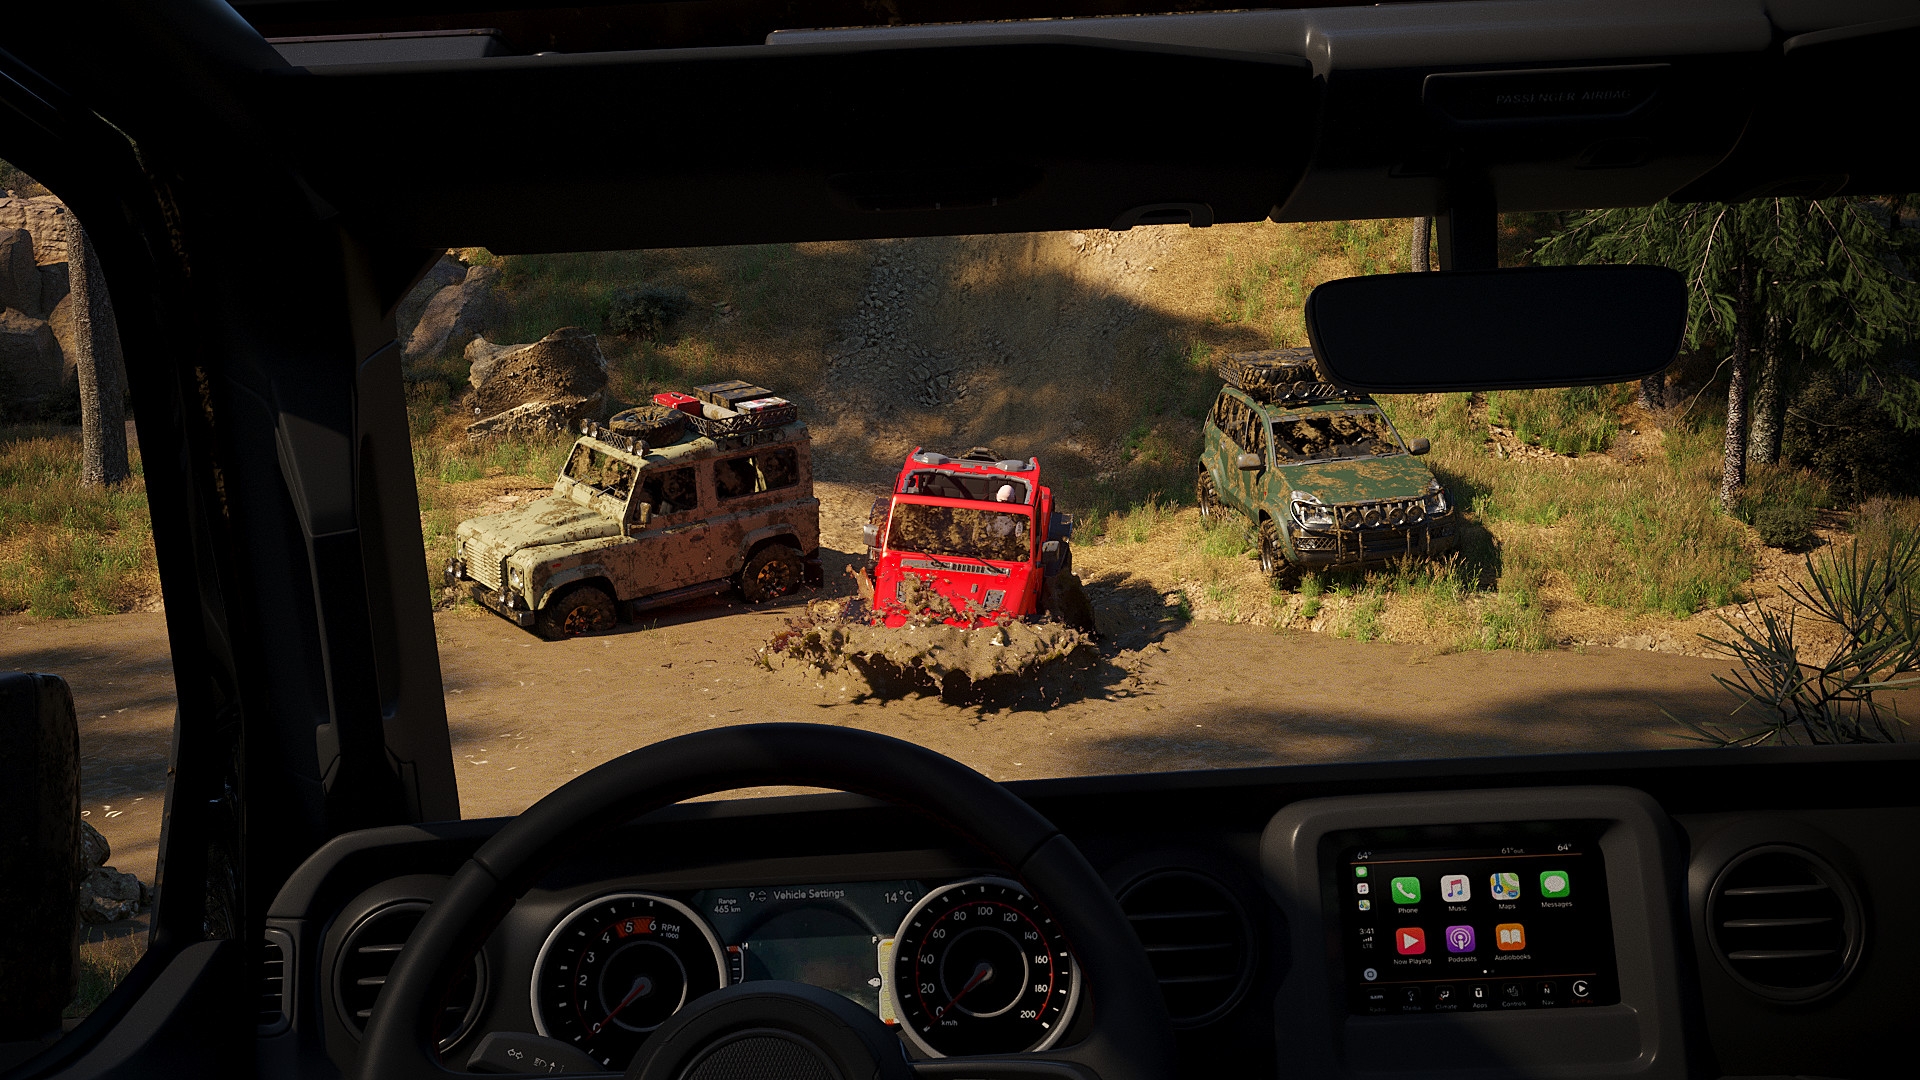 Offroad Mechanic Simulator Combines Repairing And Driving Vehicles In Upcoming Release